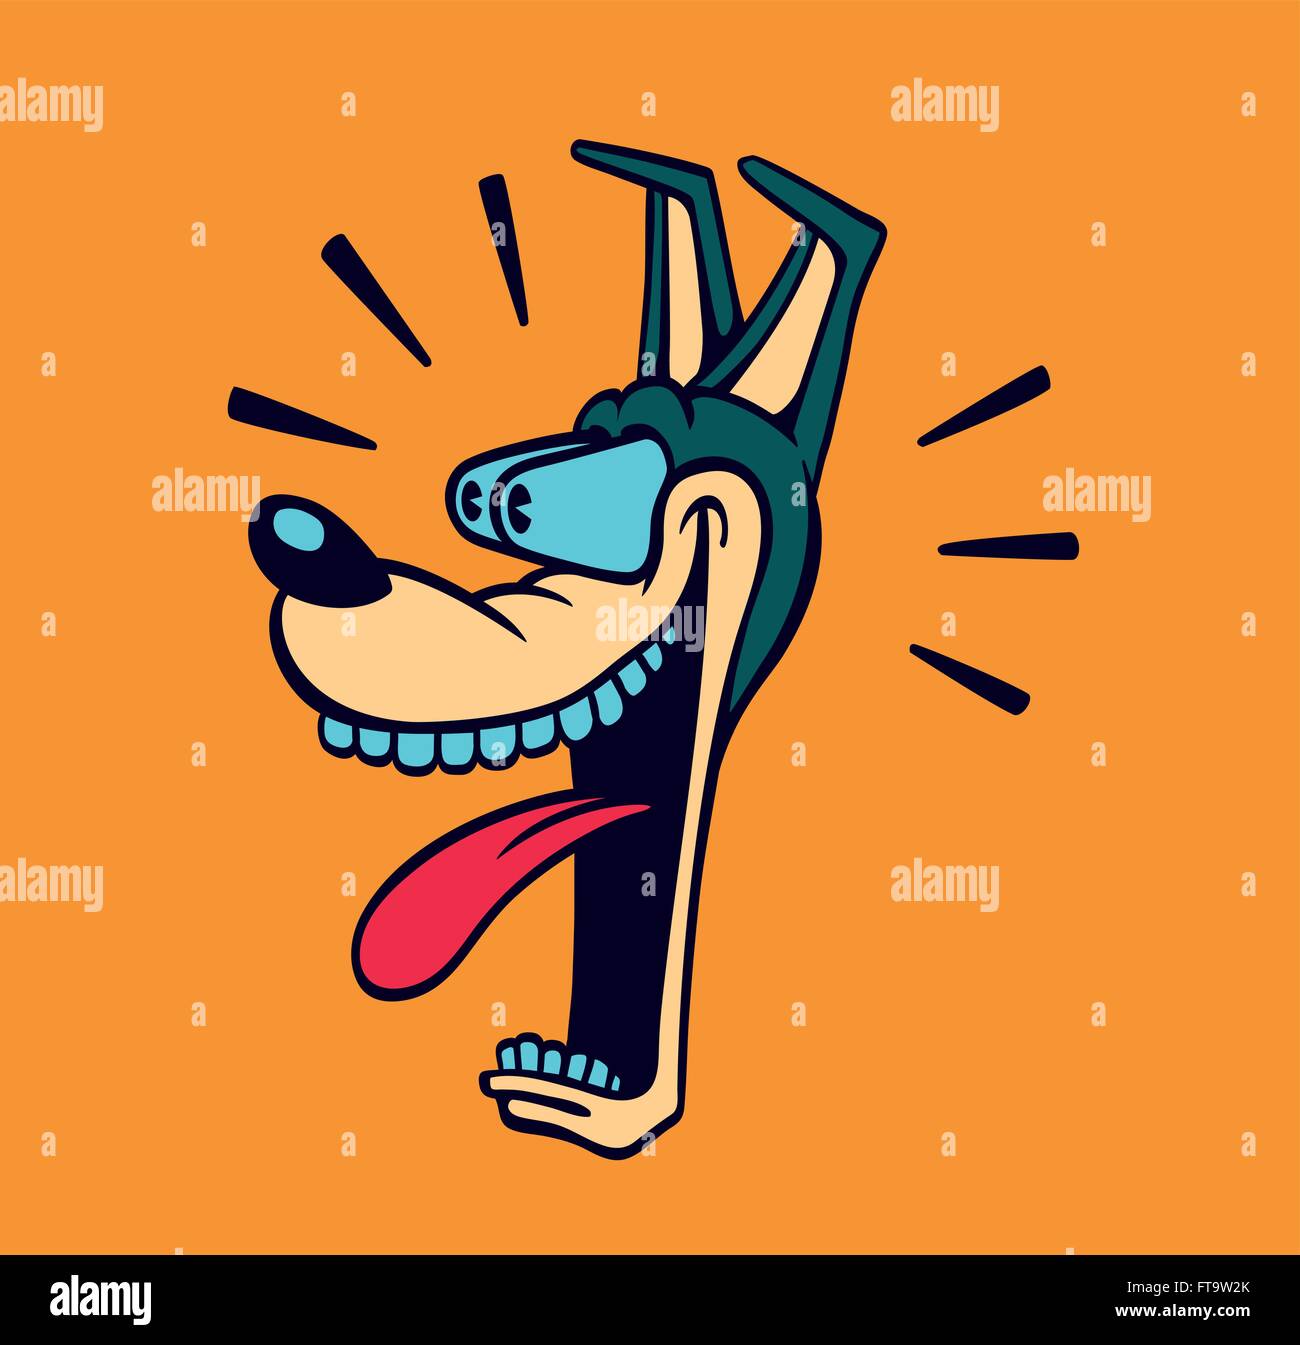 Retro cartoon style dog head wide-eyed and jaw dropping with astonished or surprised face expression vector illustration Stock Vector